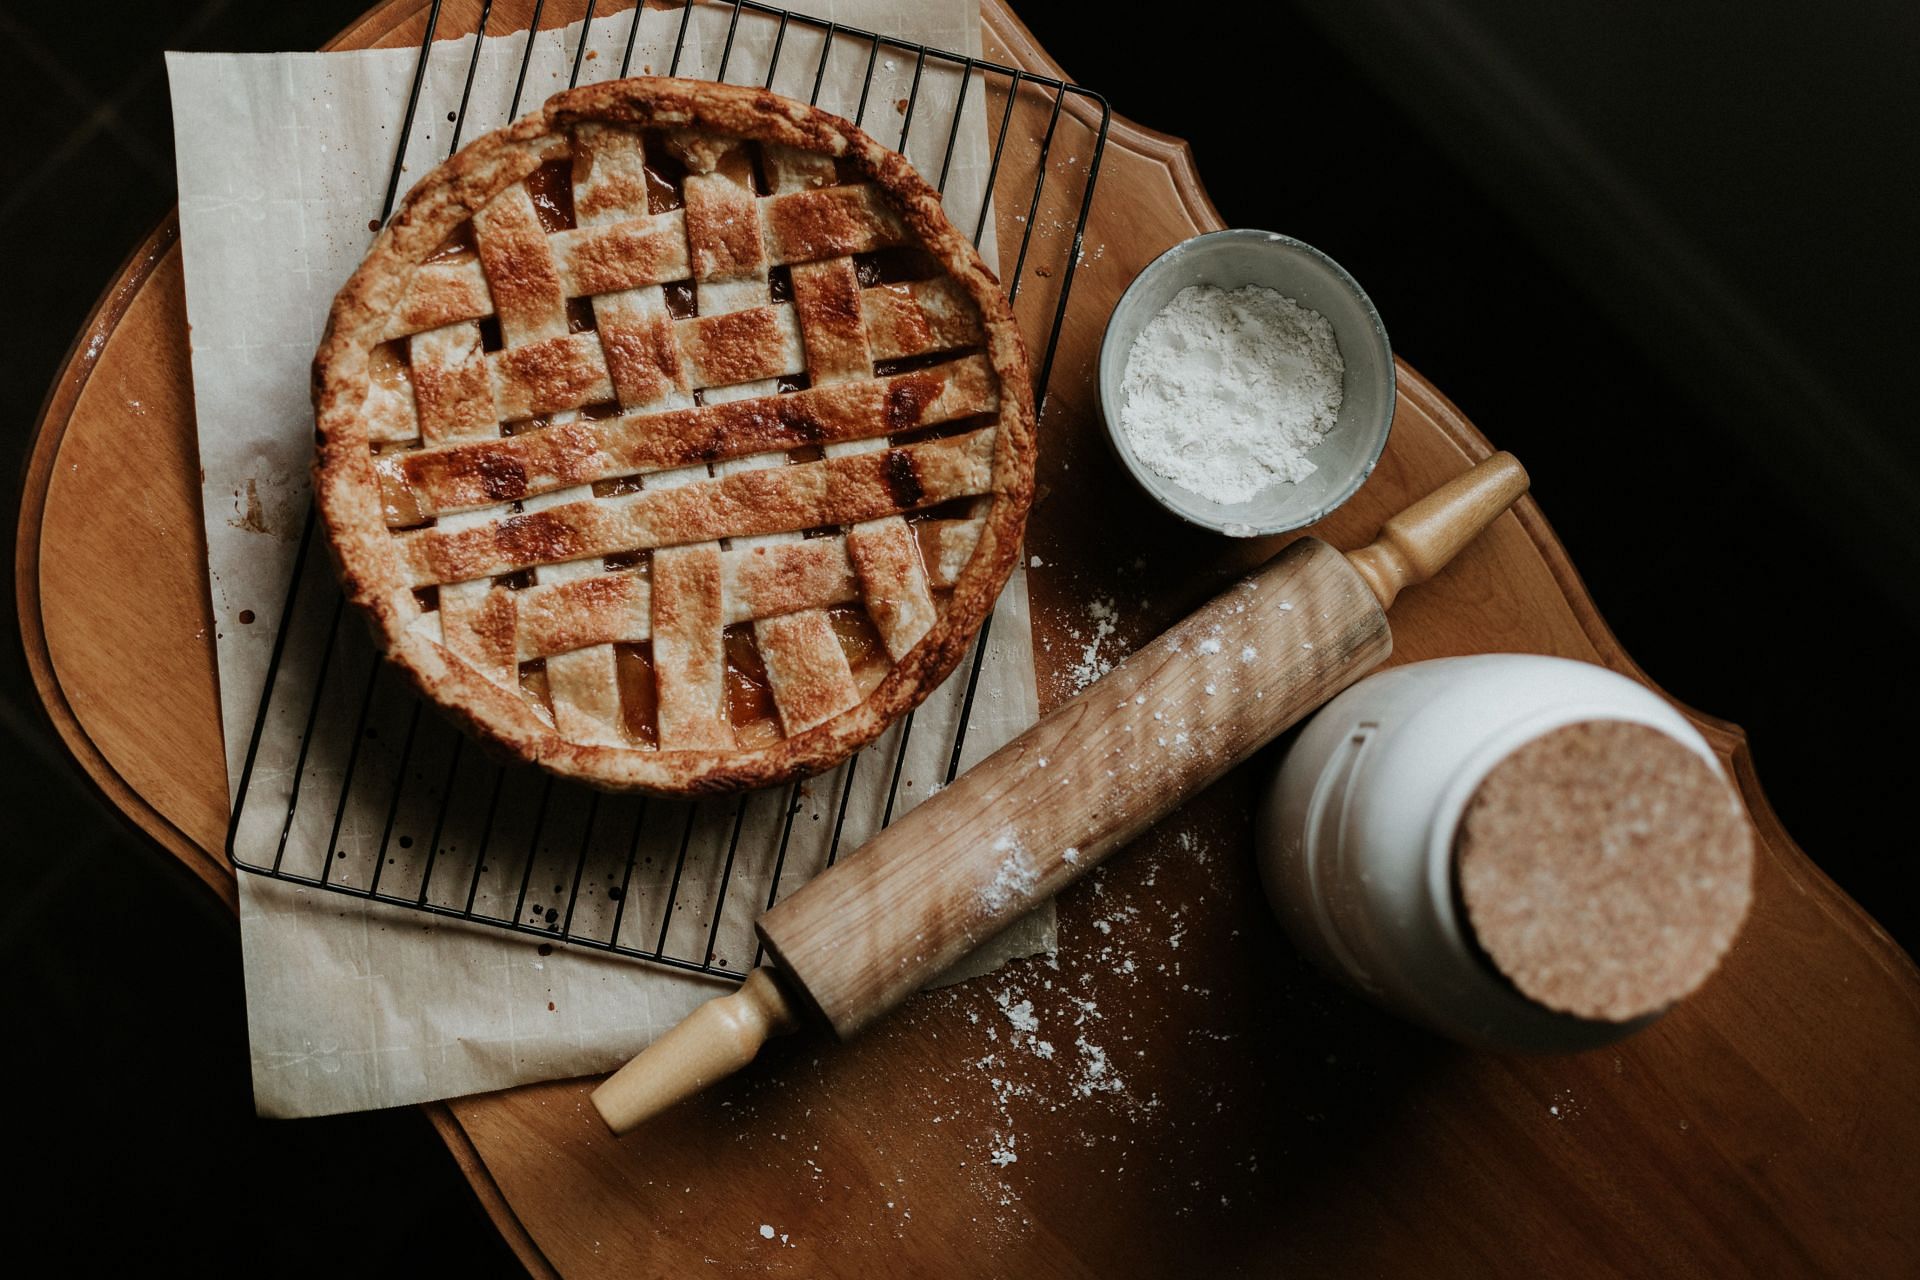 Apple pie with oven-toasted oats and chopped almonds. (Image via Unsplash / Priscilla Du Preez)